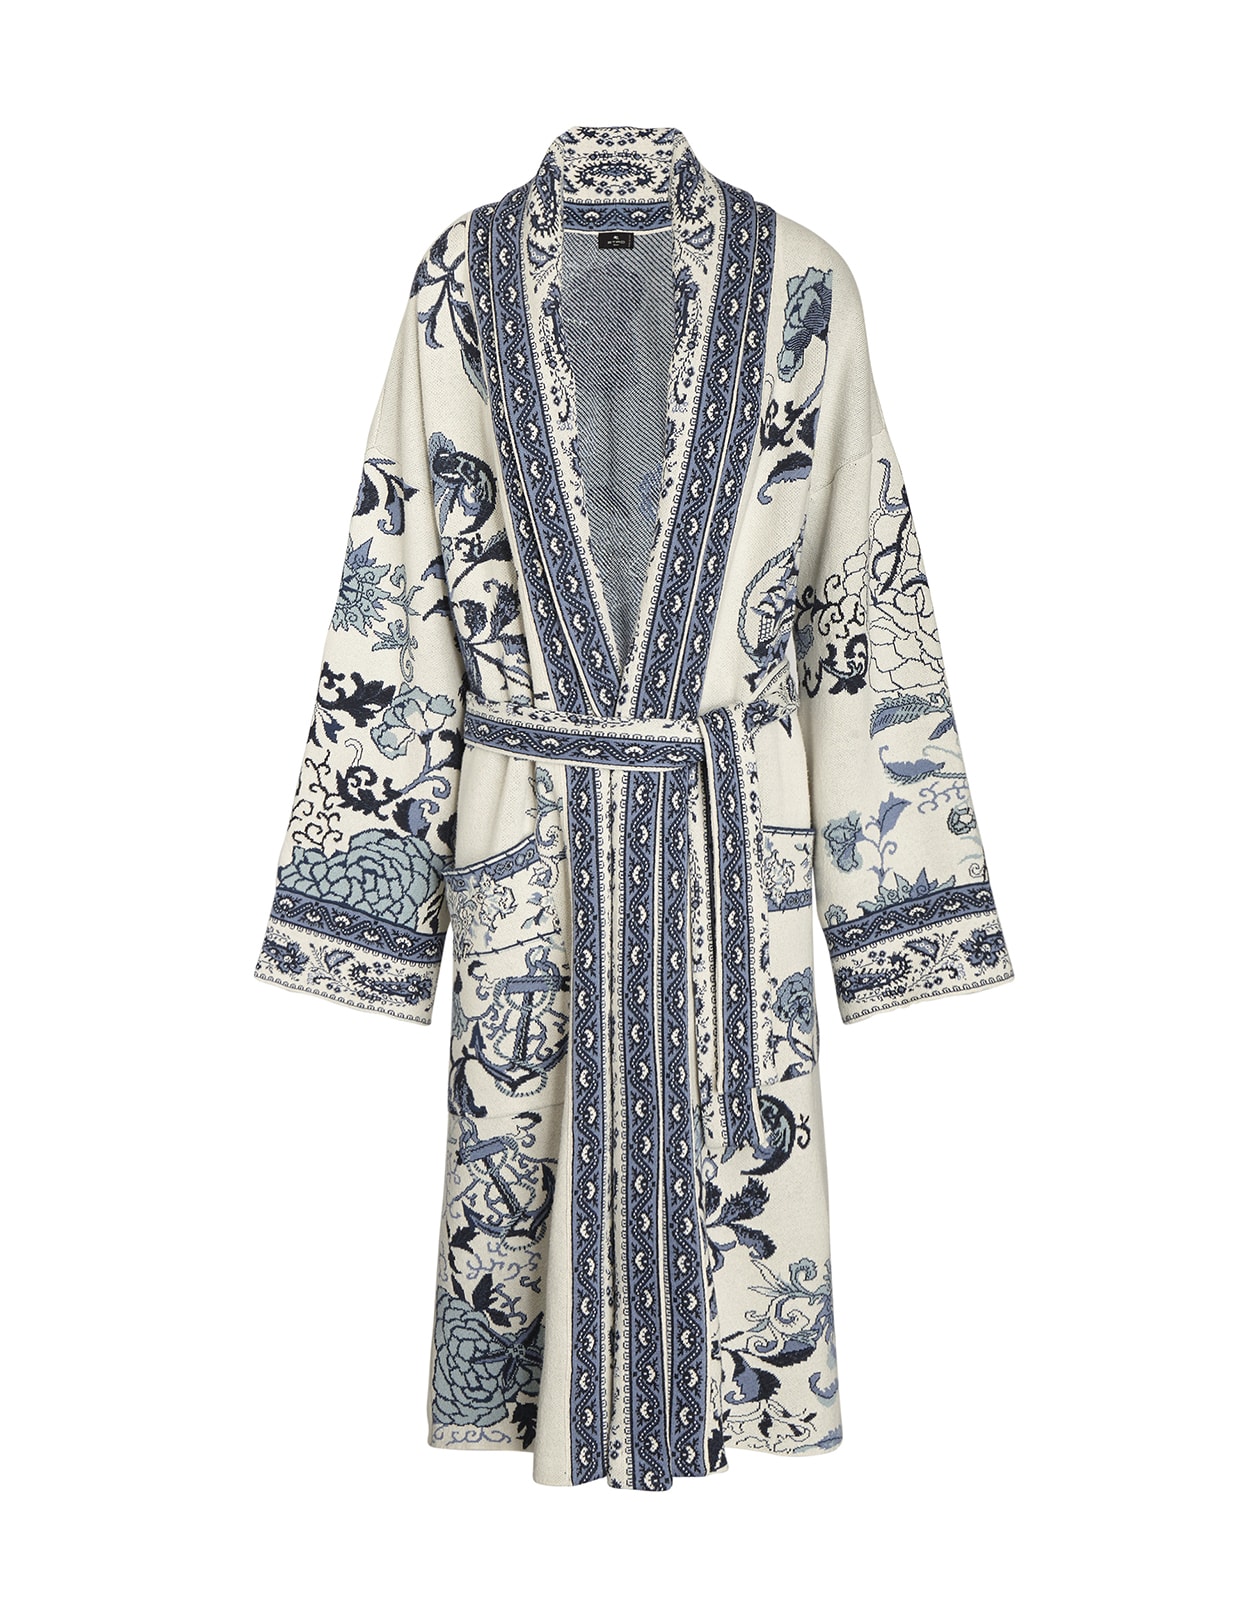 ETRO WOMAN LONG COAT IN WHITE AND BLUE JACQUARD KNIT